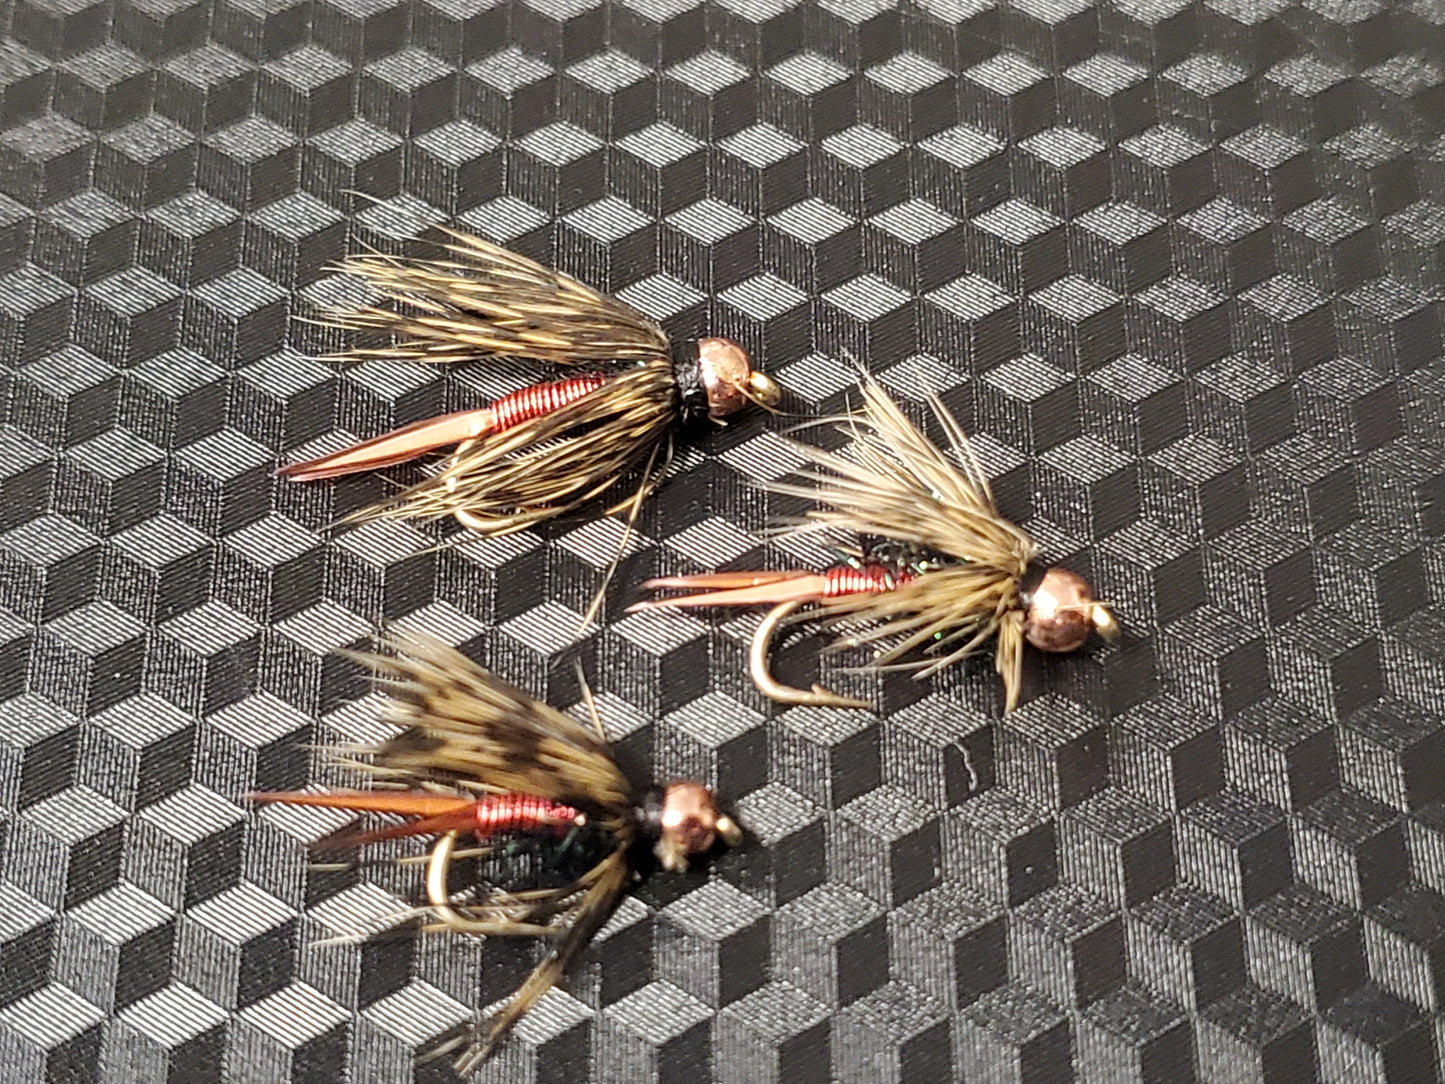 12 Copper John Soft Hackle Selection, Red Copper Soft Hackle John Selection, Mixed Dozen Copper John